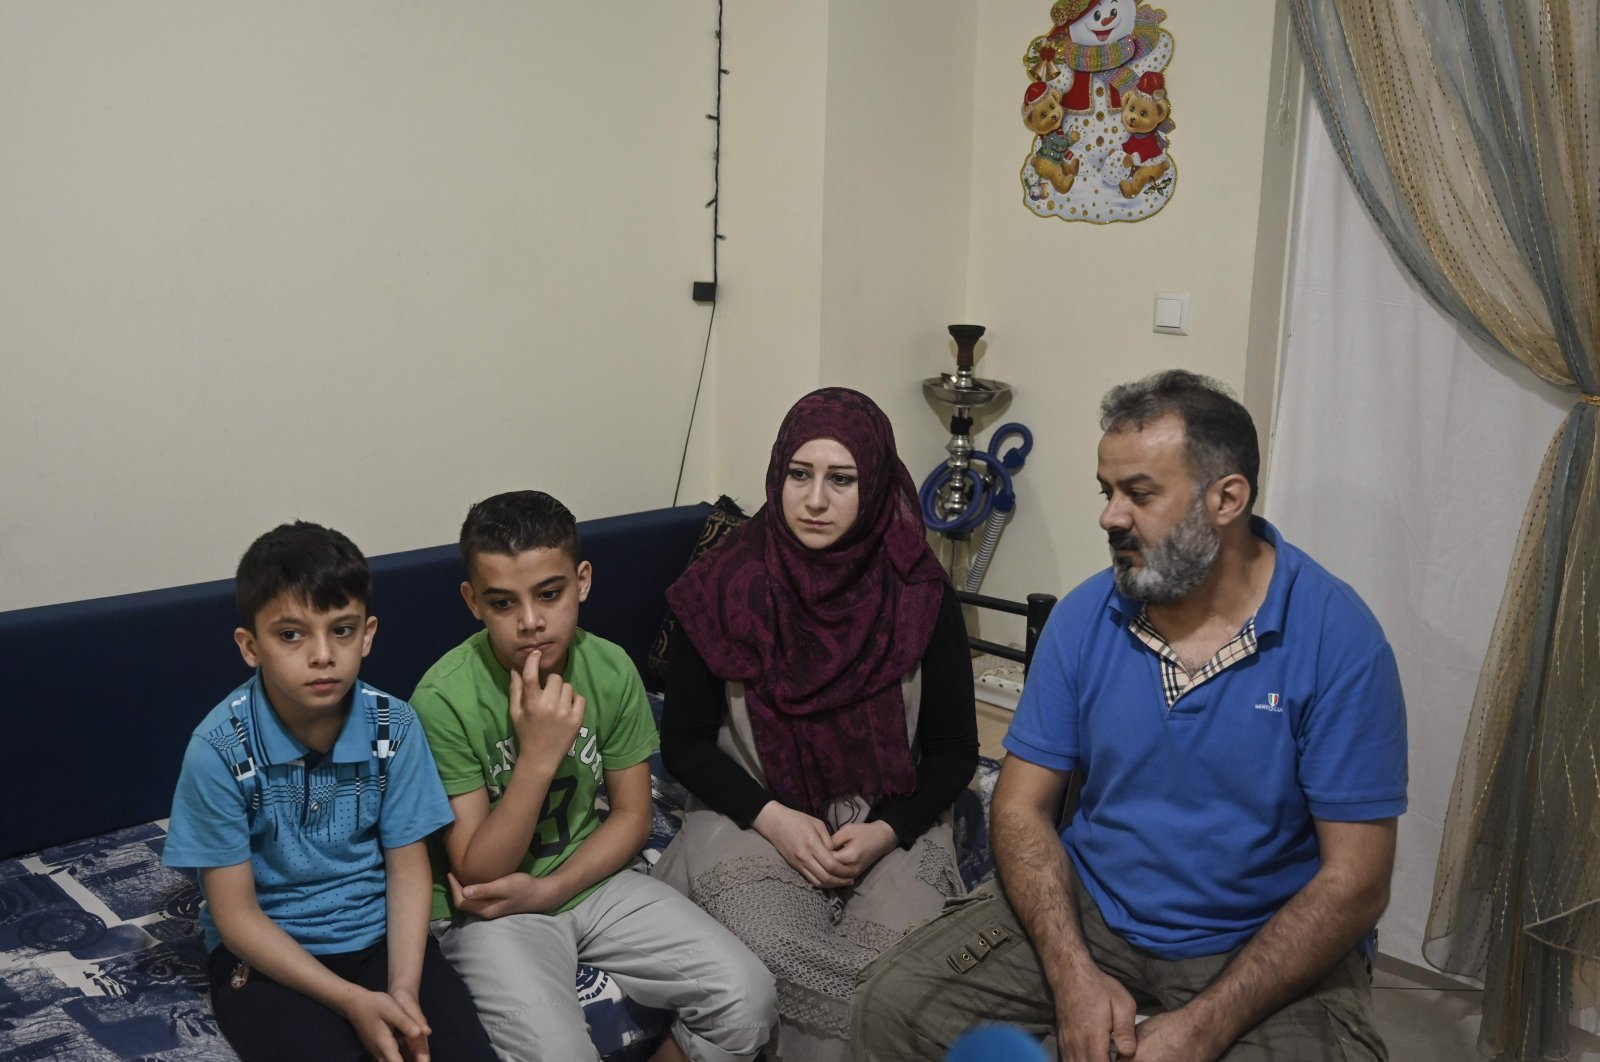 Abdelkader Rahmoun (R), a 44-year-old Syrian and his family sit in their apartment provided by NGO's through EU programs, at a working-class district in Piraeus near Athens on May 29, 2020. (AFP Photo)